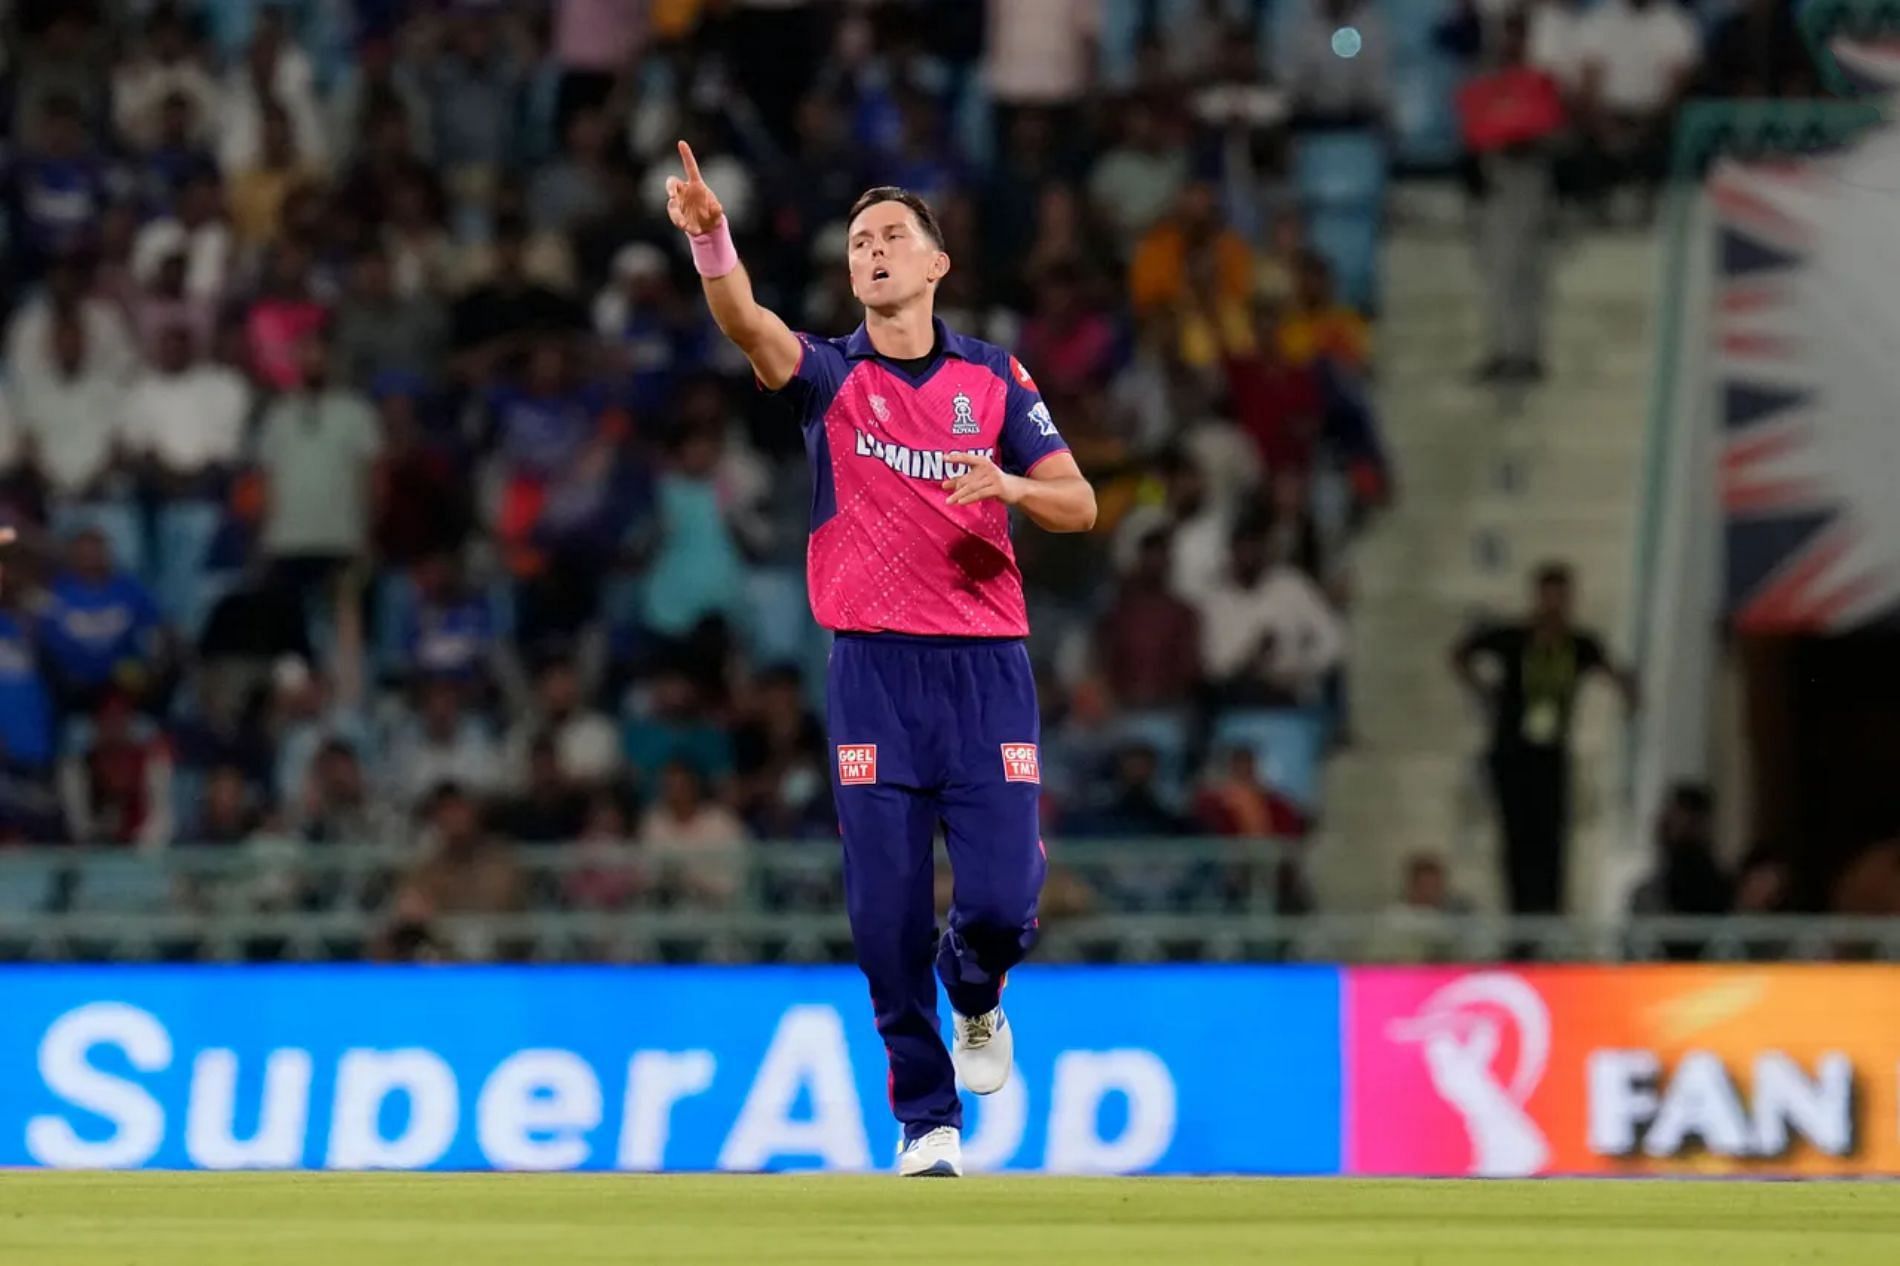 Trent Boult has picked up a number of early scalps. (Pic: BCCI/ iplt20.com)